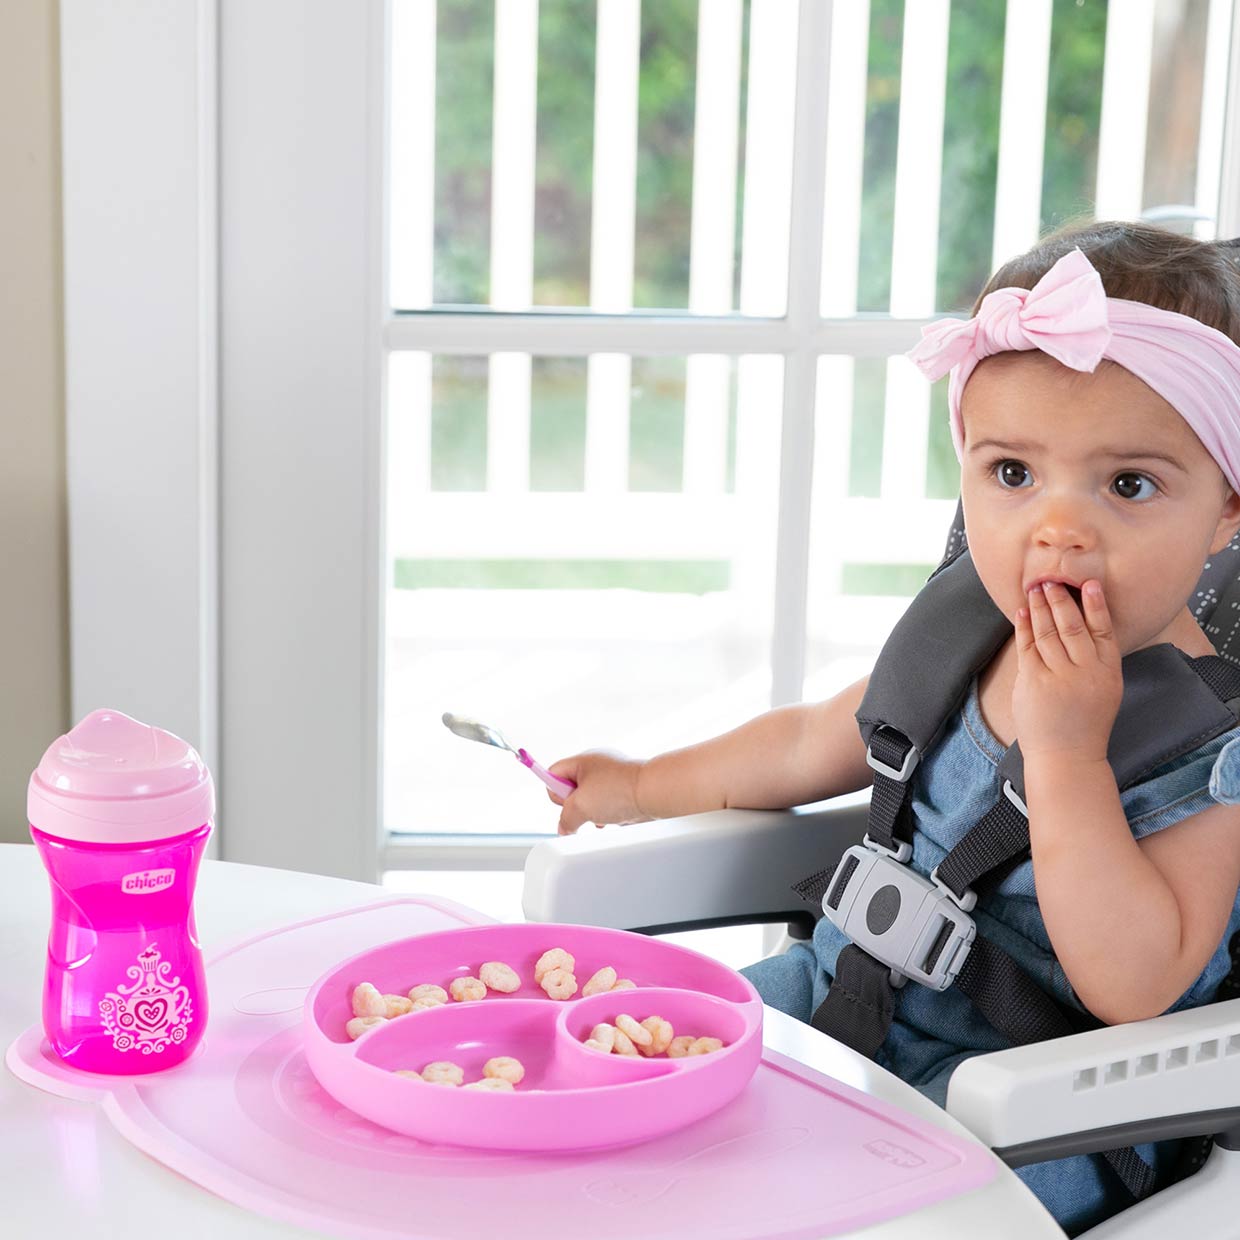 Baby-Led Weaning What to Expect image